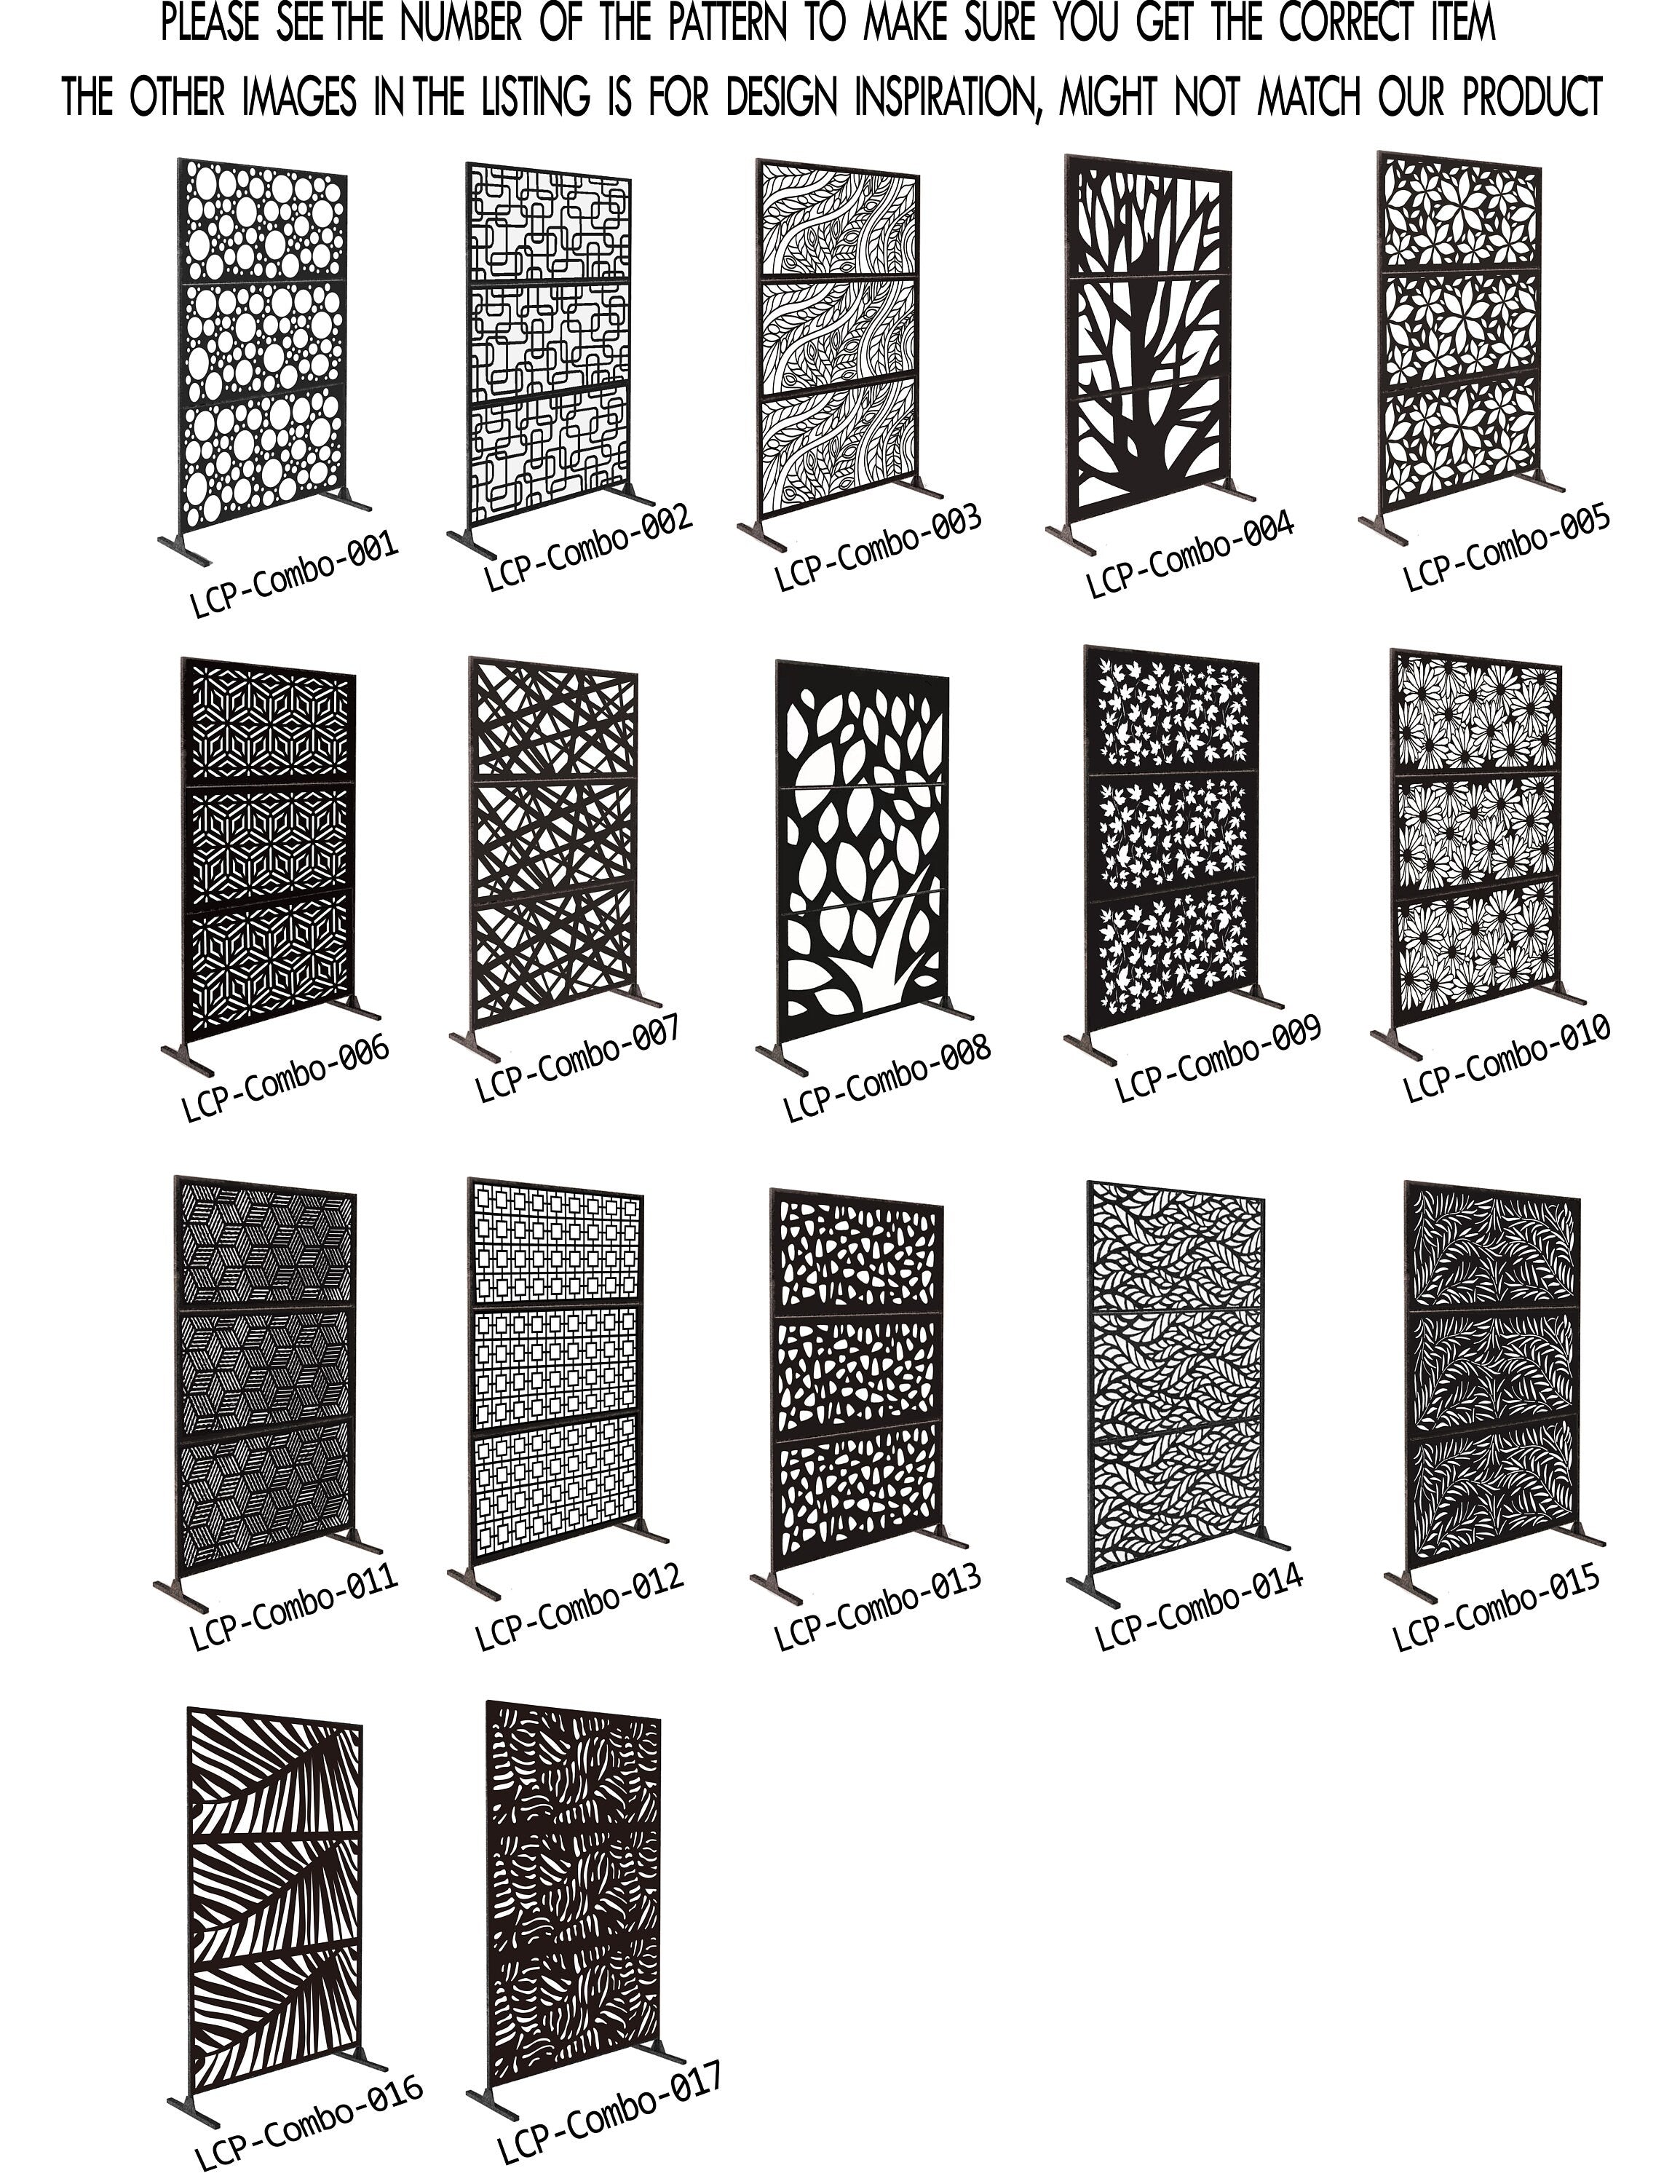 Metal Privacy Screen, Laser Cut Decorative Steel Privacy Panel Metal Fencing, Hanging Room Divider Partitions Panel Screen,48x75inch C009